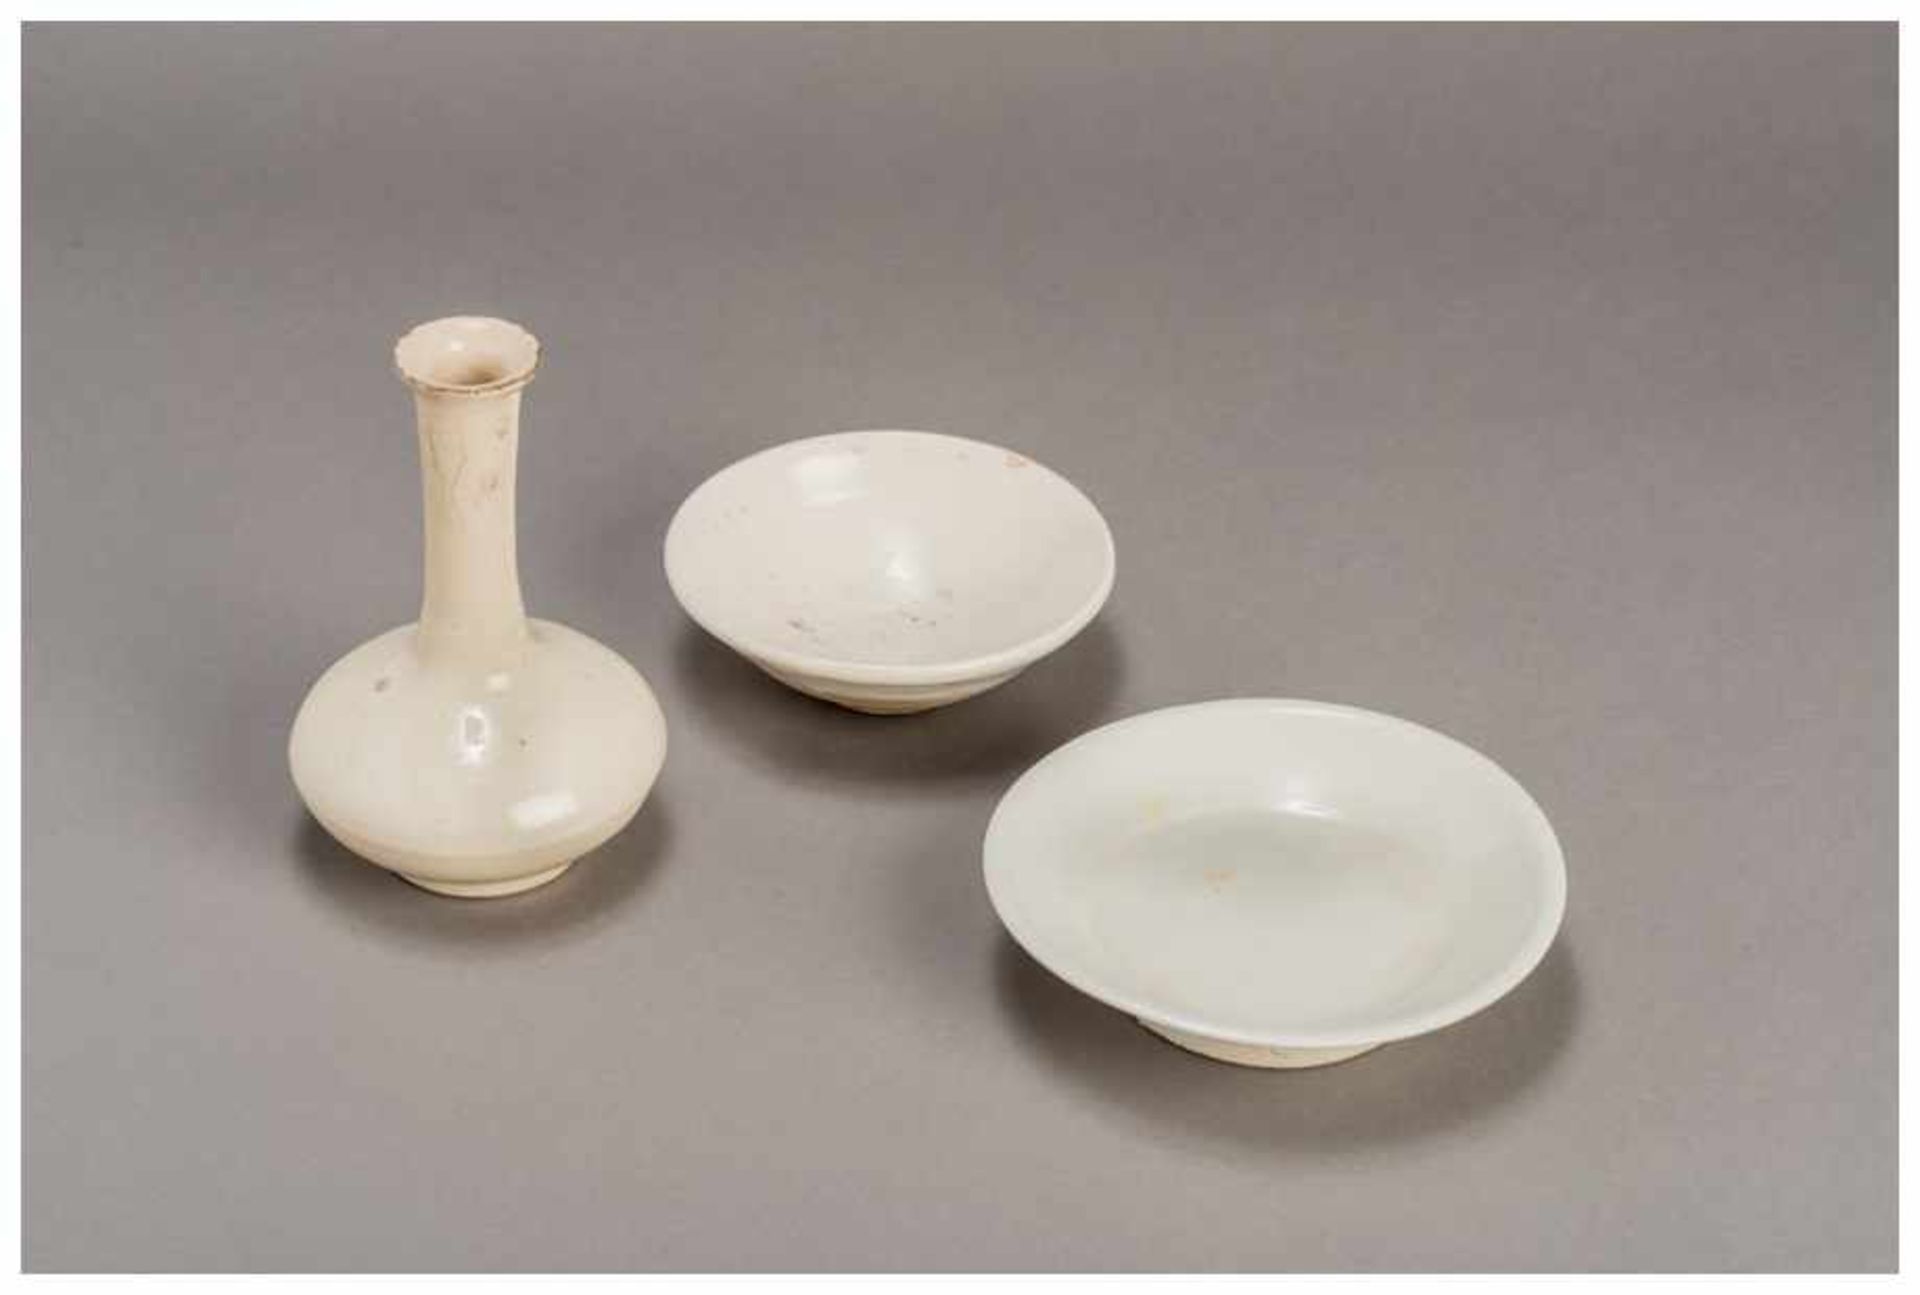 TWO SMALL BOWLS AND A VASE Glazed ceramic. China, Ming to Qing dynastyThe larger of the two bowls is - Image 2 of 4